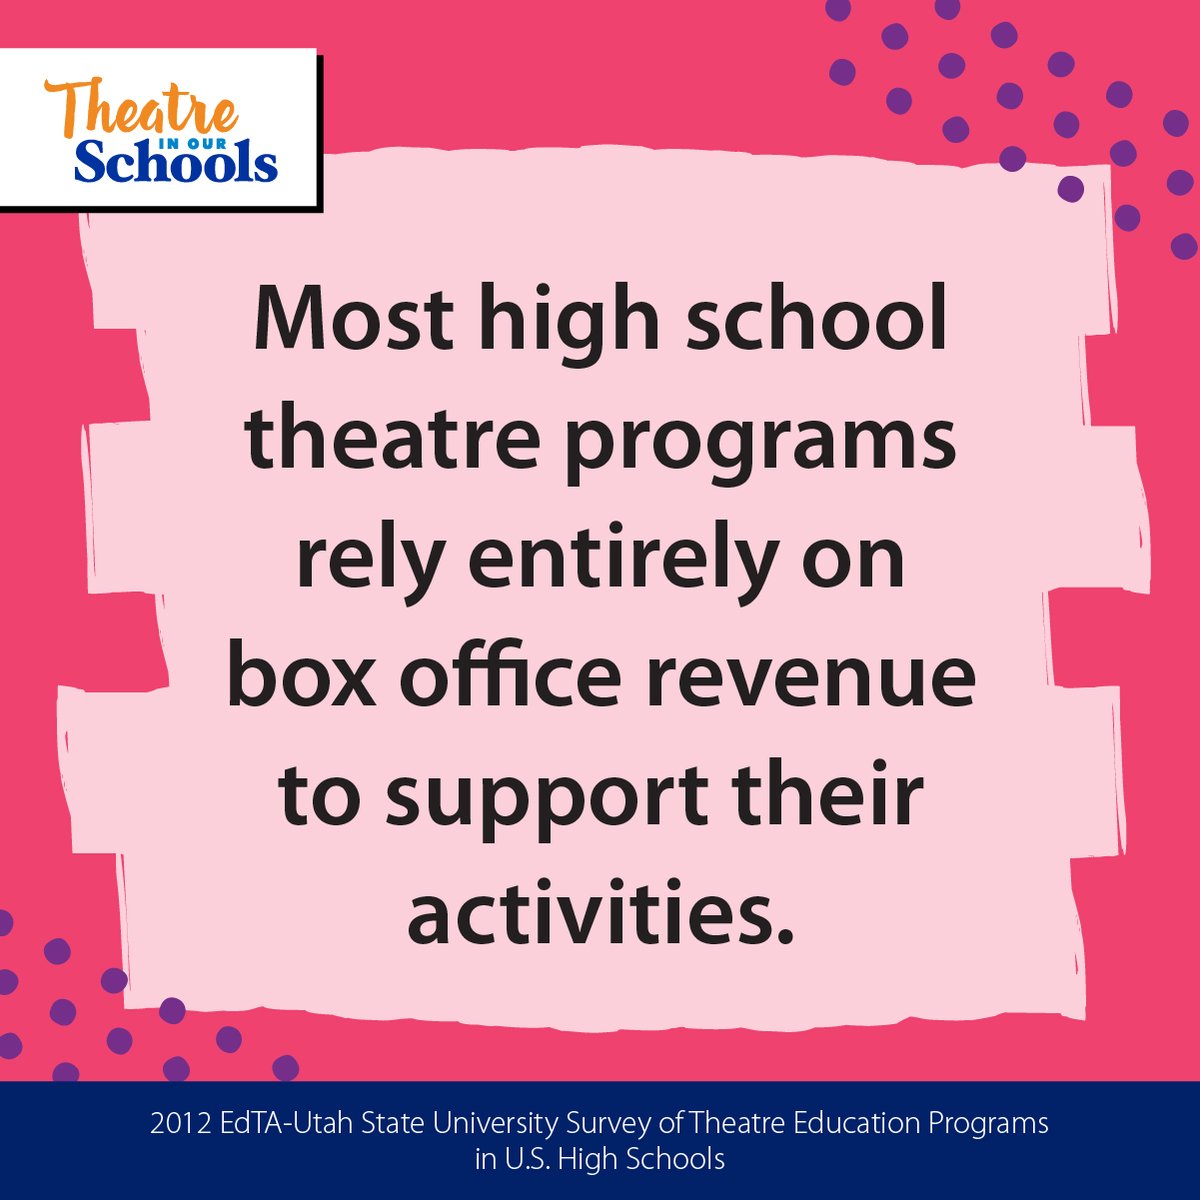 Is this best way for high school directors to teach artistic endeavours, or to take artistic risks? Not everything will be popular enough to fill every seat. Or is it riskier to beholden to a school board? #TheatreInOurSchools #TIOS24